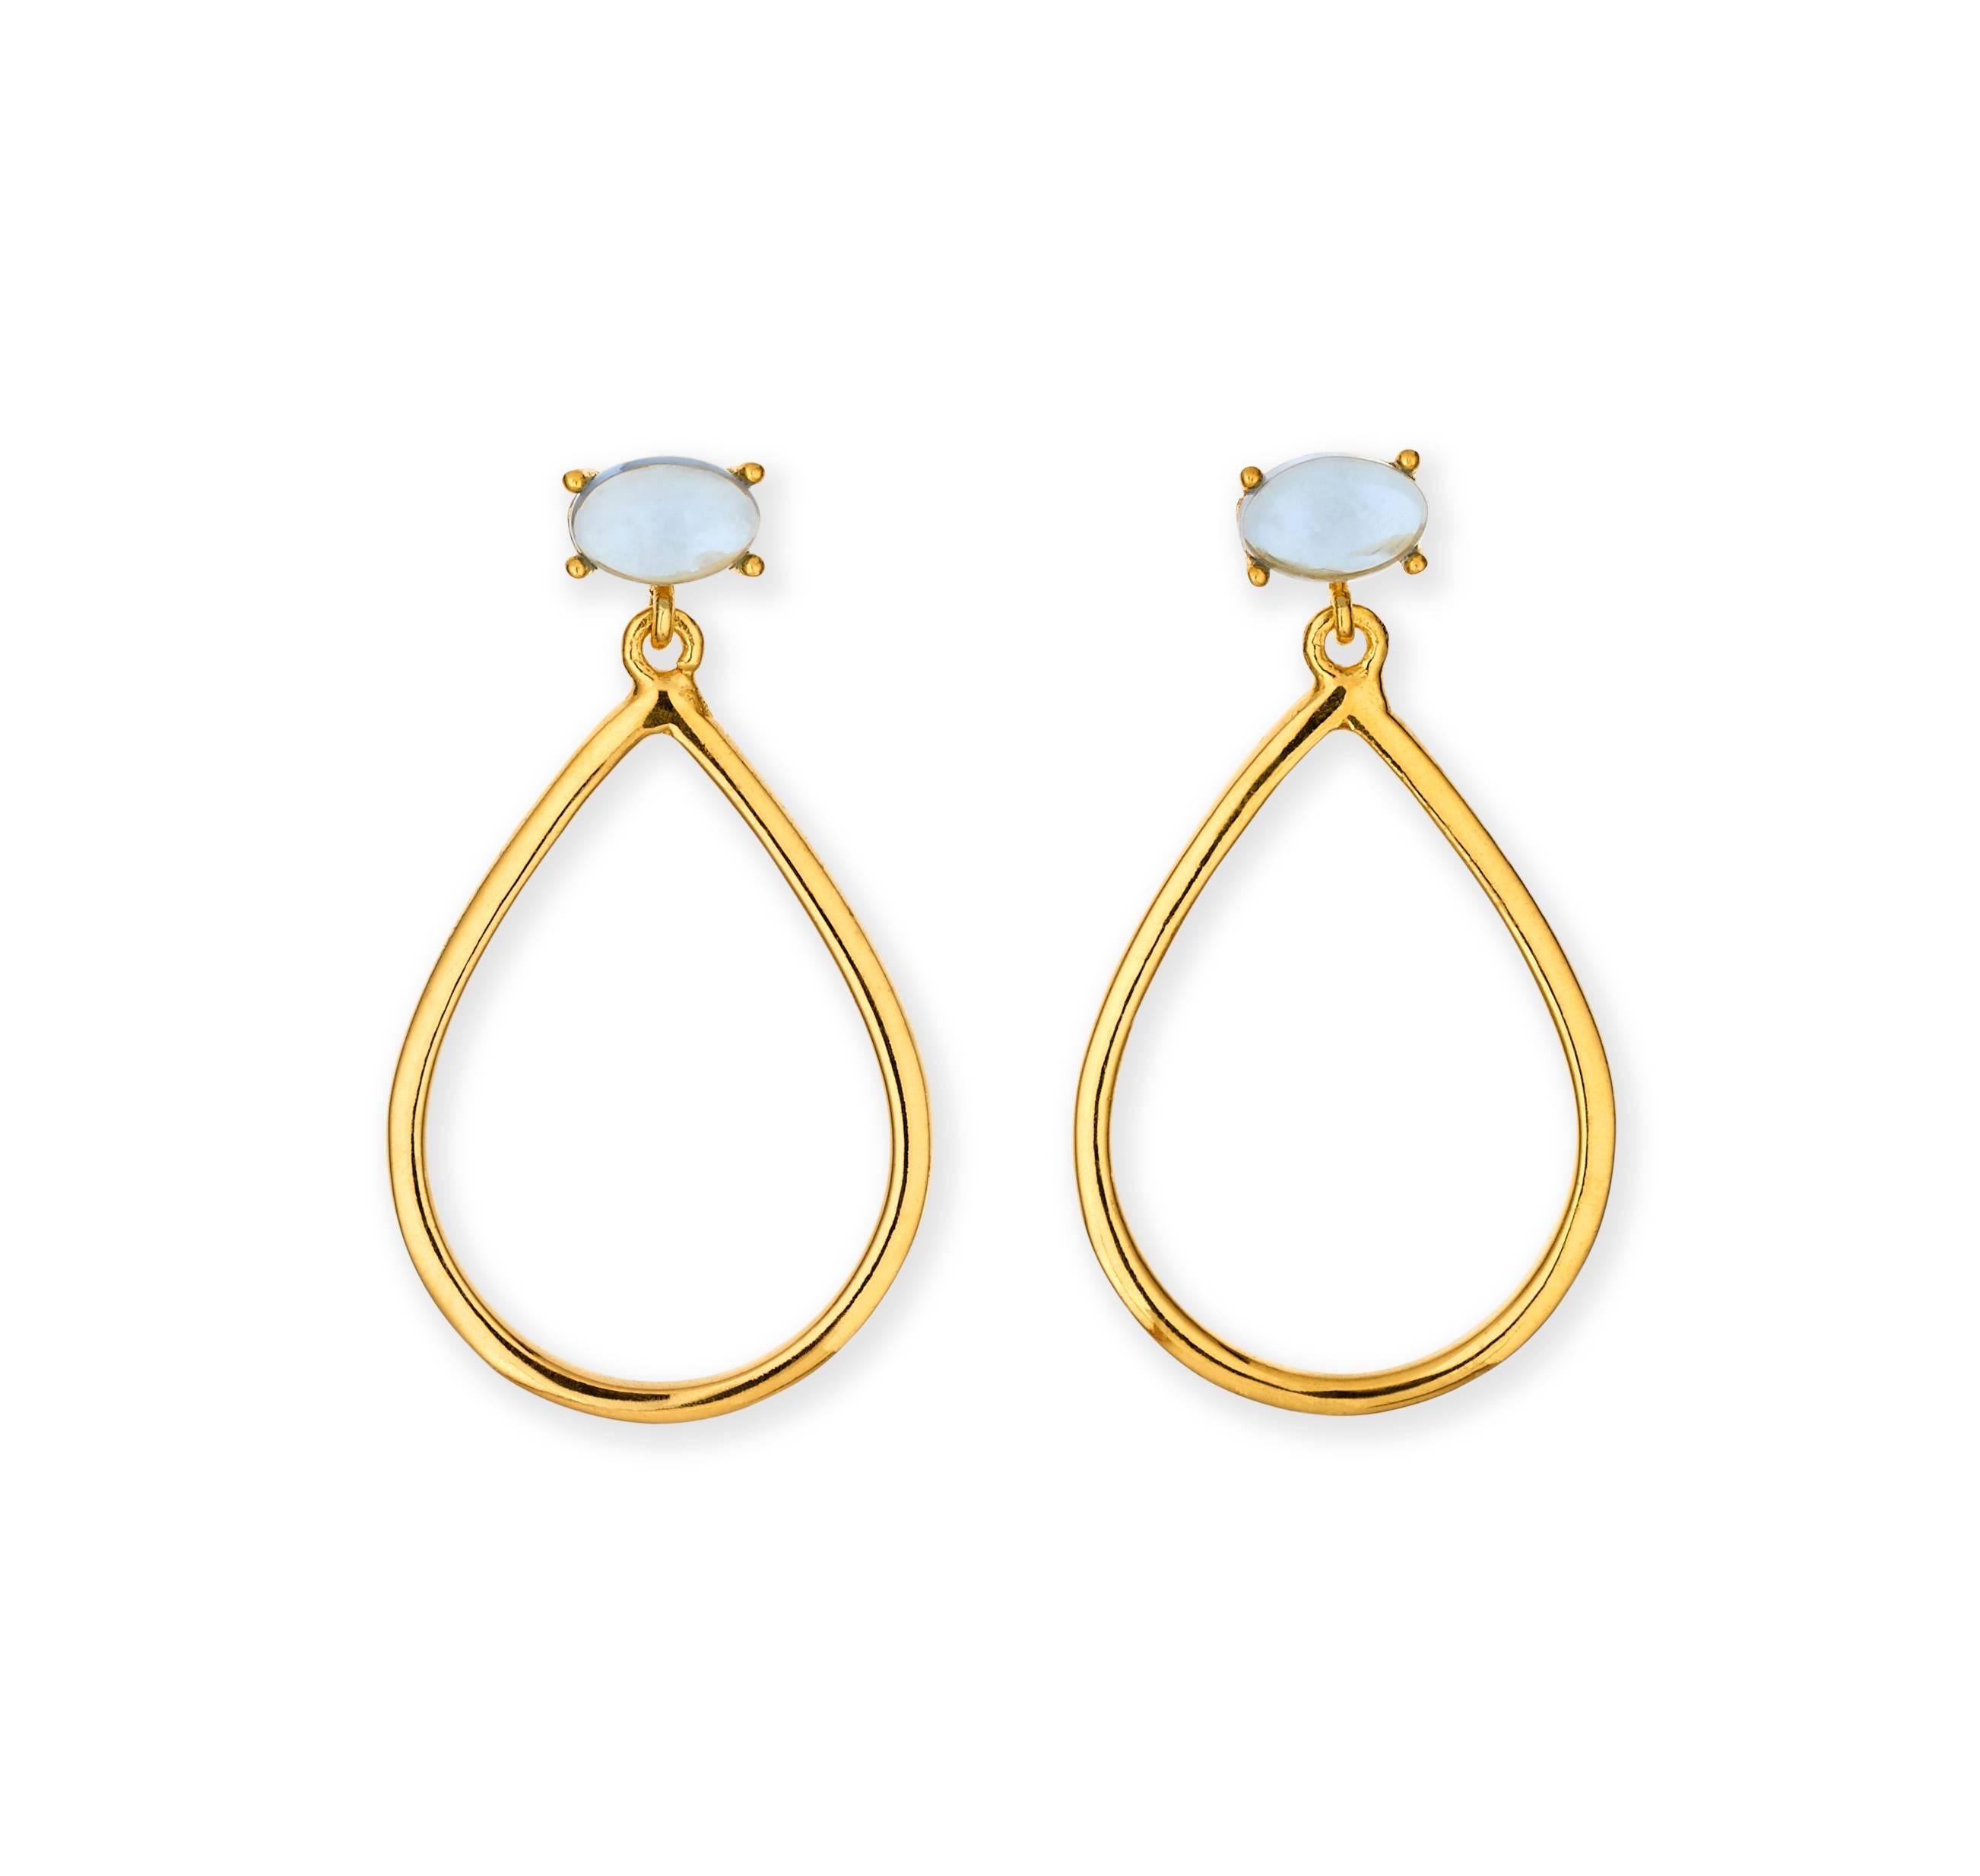 These beautifully simple drop earrings are a perfect look for everyday chic. The total length of the earrings is 30mm, the gold metal is 2mm deep, and they measure 18mm at their widest point. Style with our Skopleos pendants in the same or